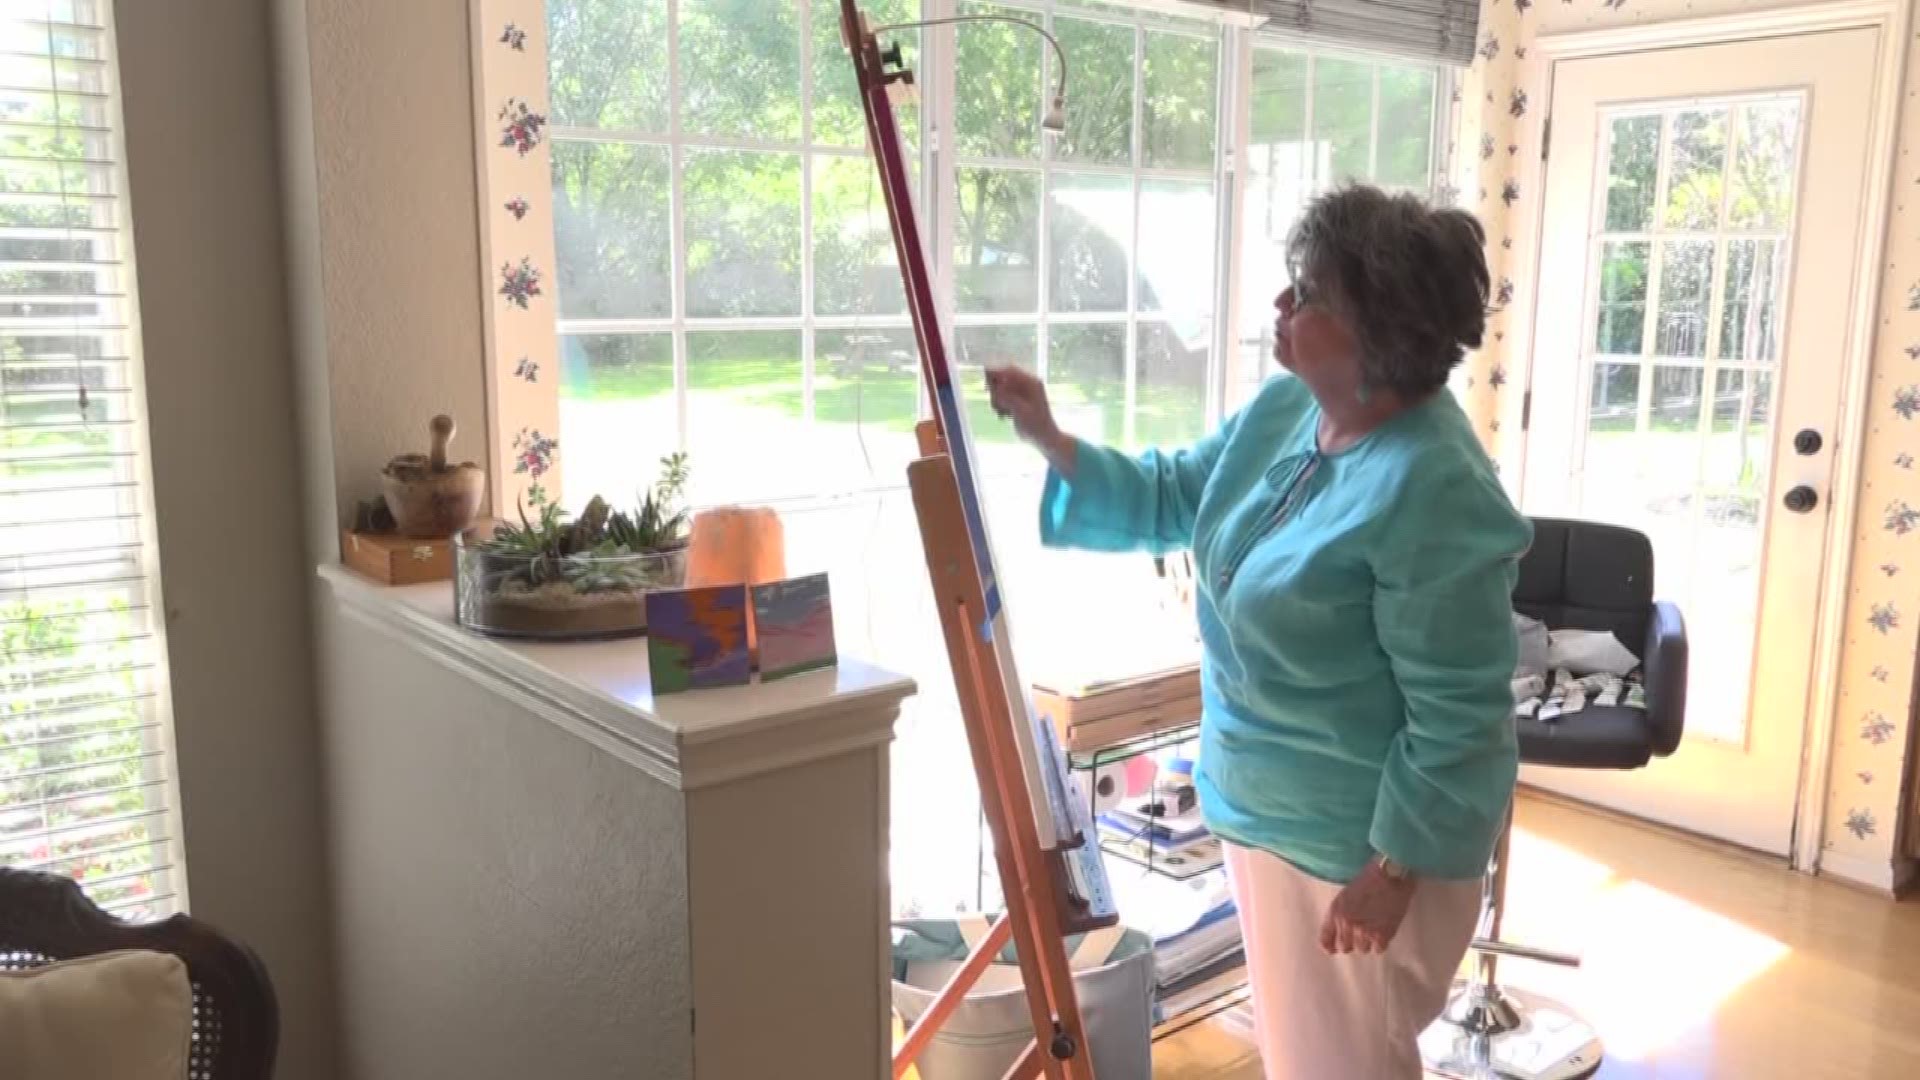 Lisa Webb, who was self-employed for 30 years, became an artist after suffering a concussion two years ago.